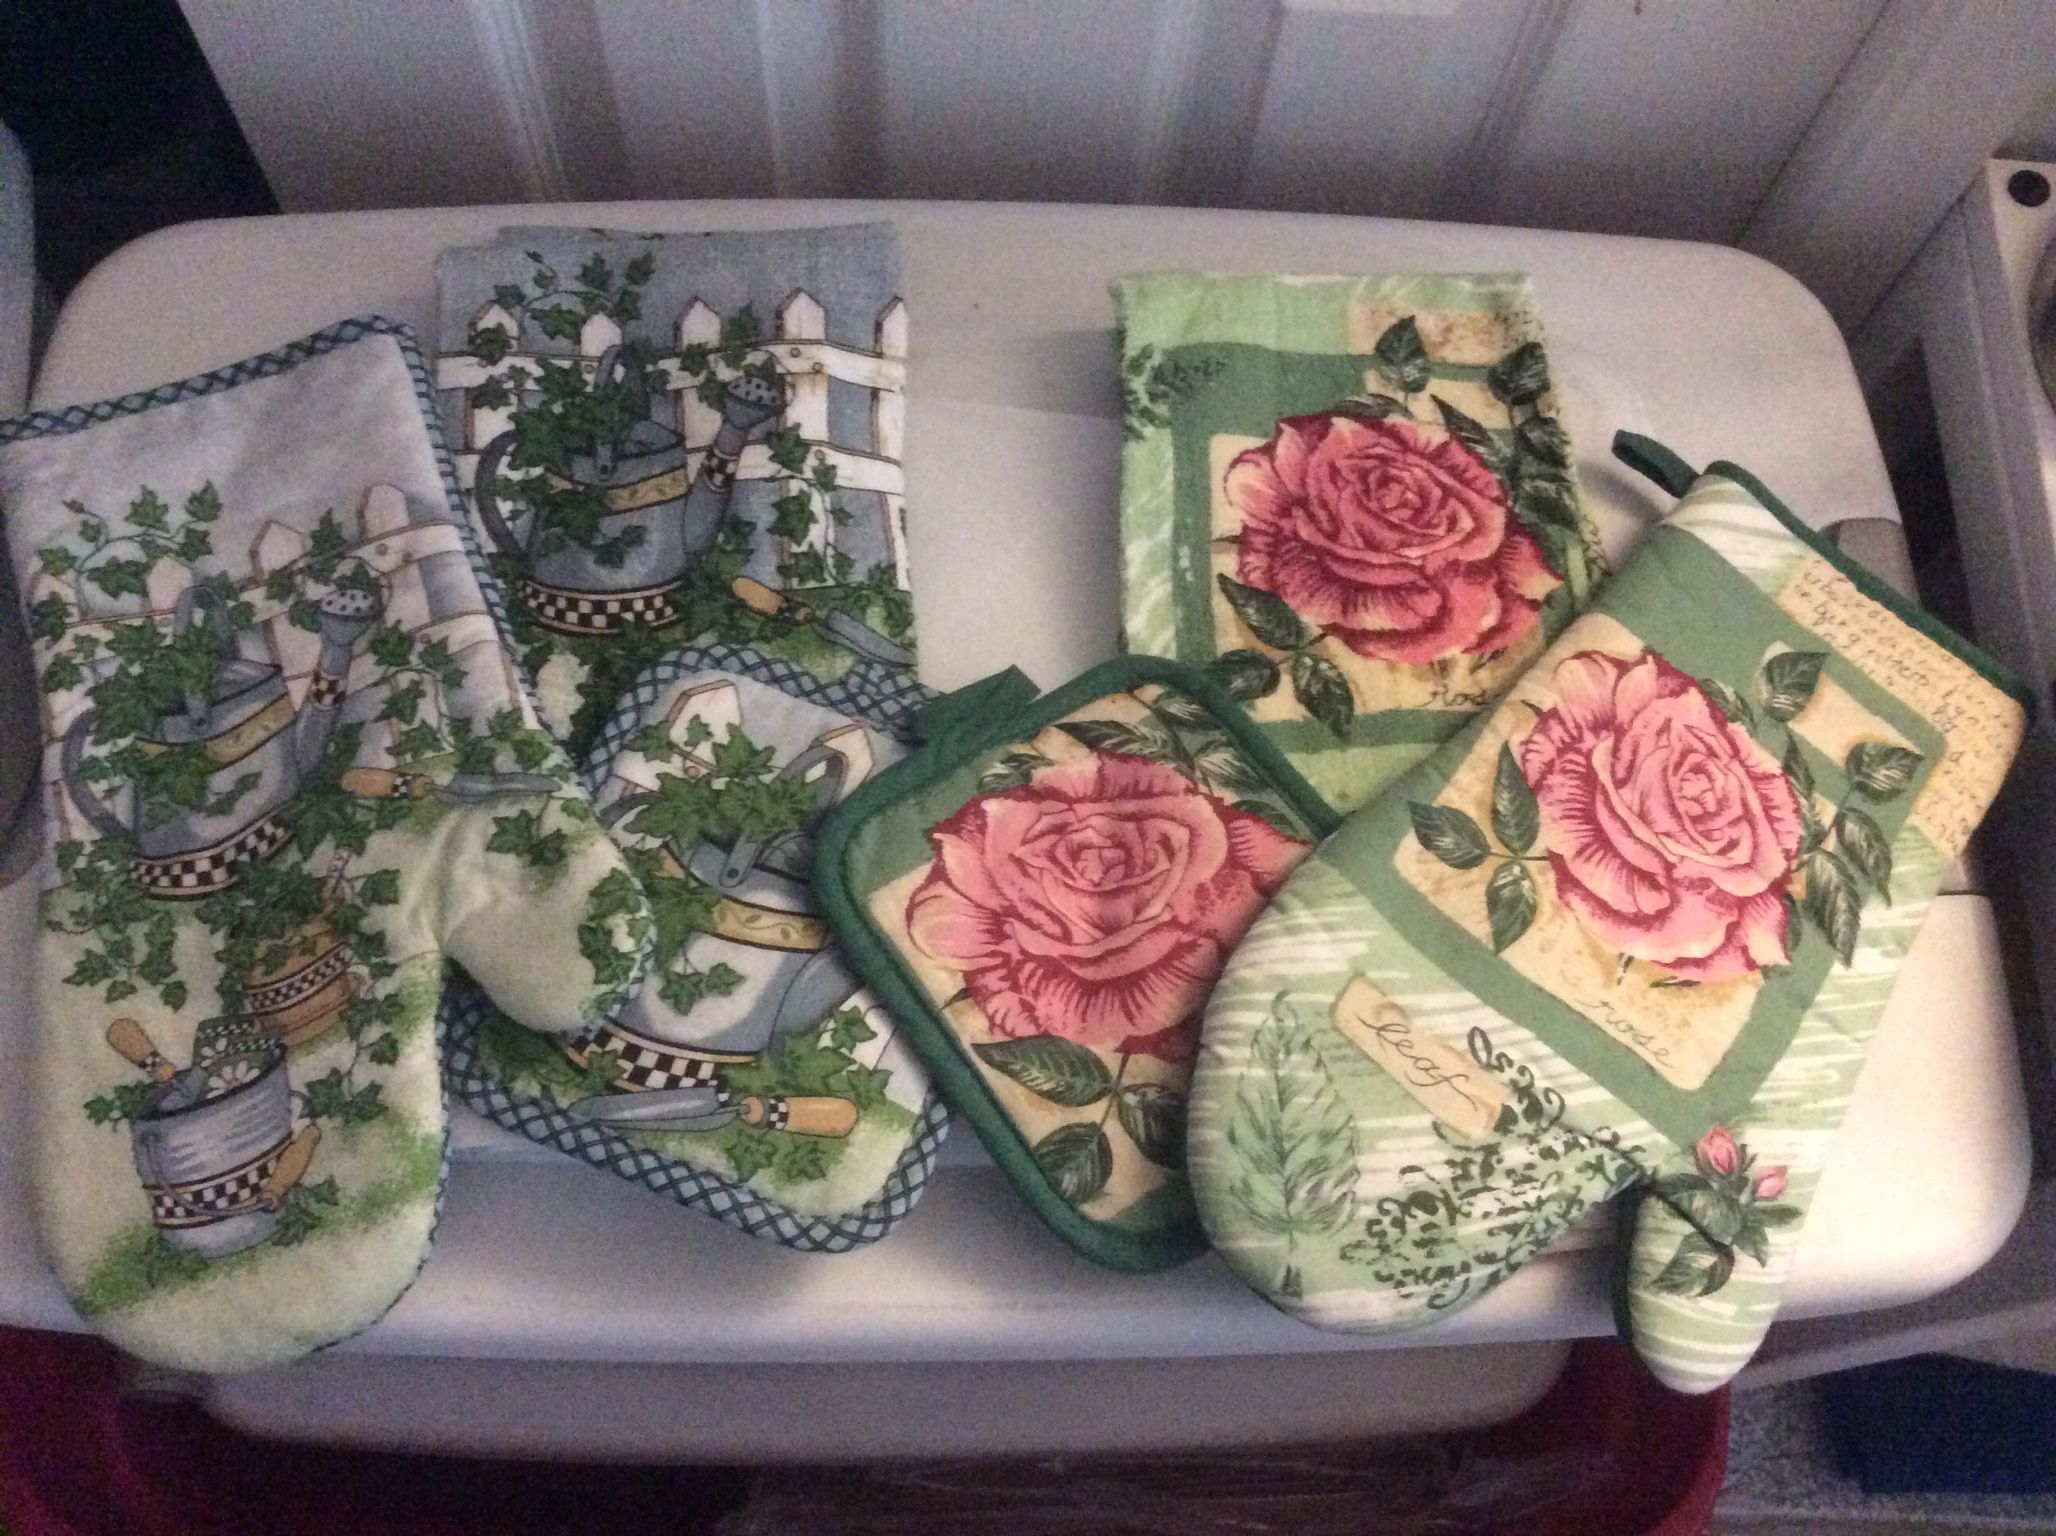 Kitchen Towels Sets. New    4 Pieces In Each Set       One  Set Pink Roses, One Set Garden  Items Blue Green Colors  Each Set $12.00 